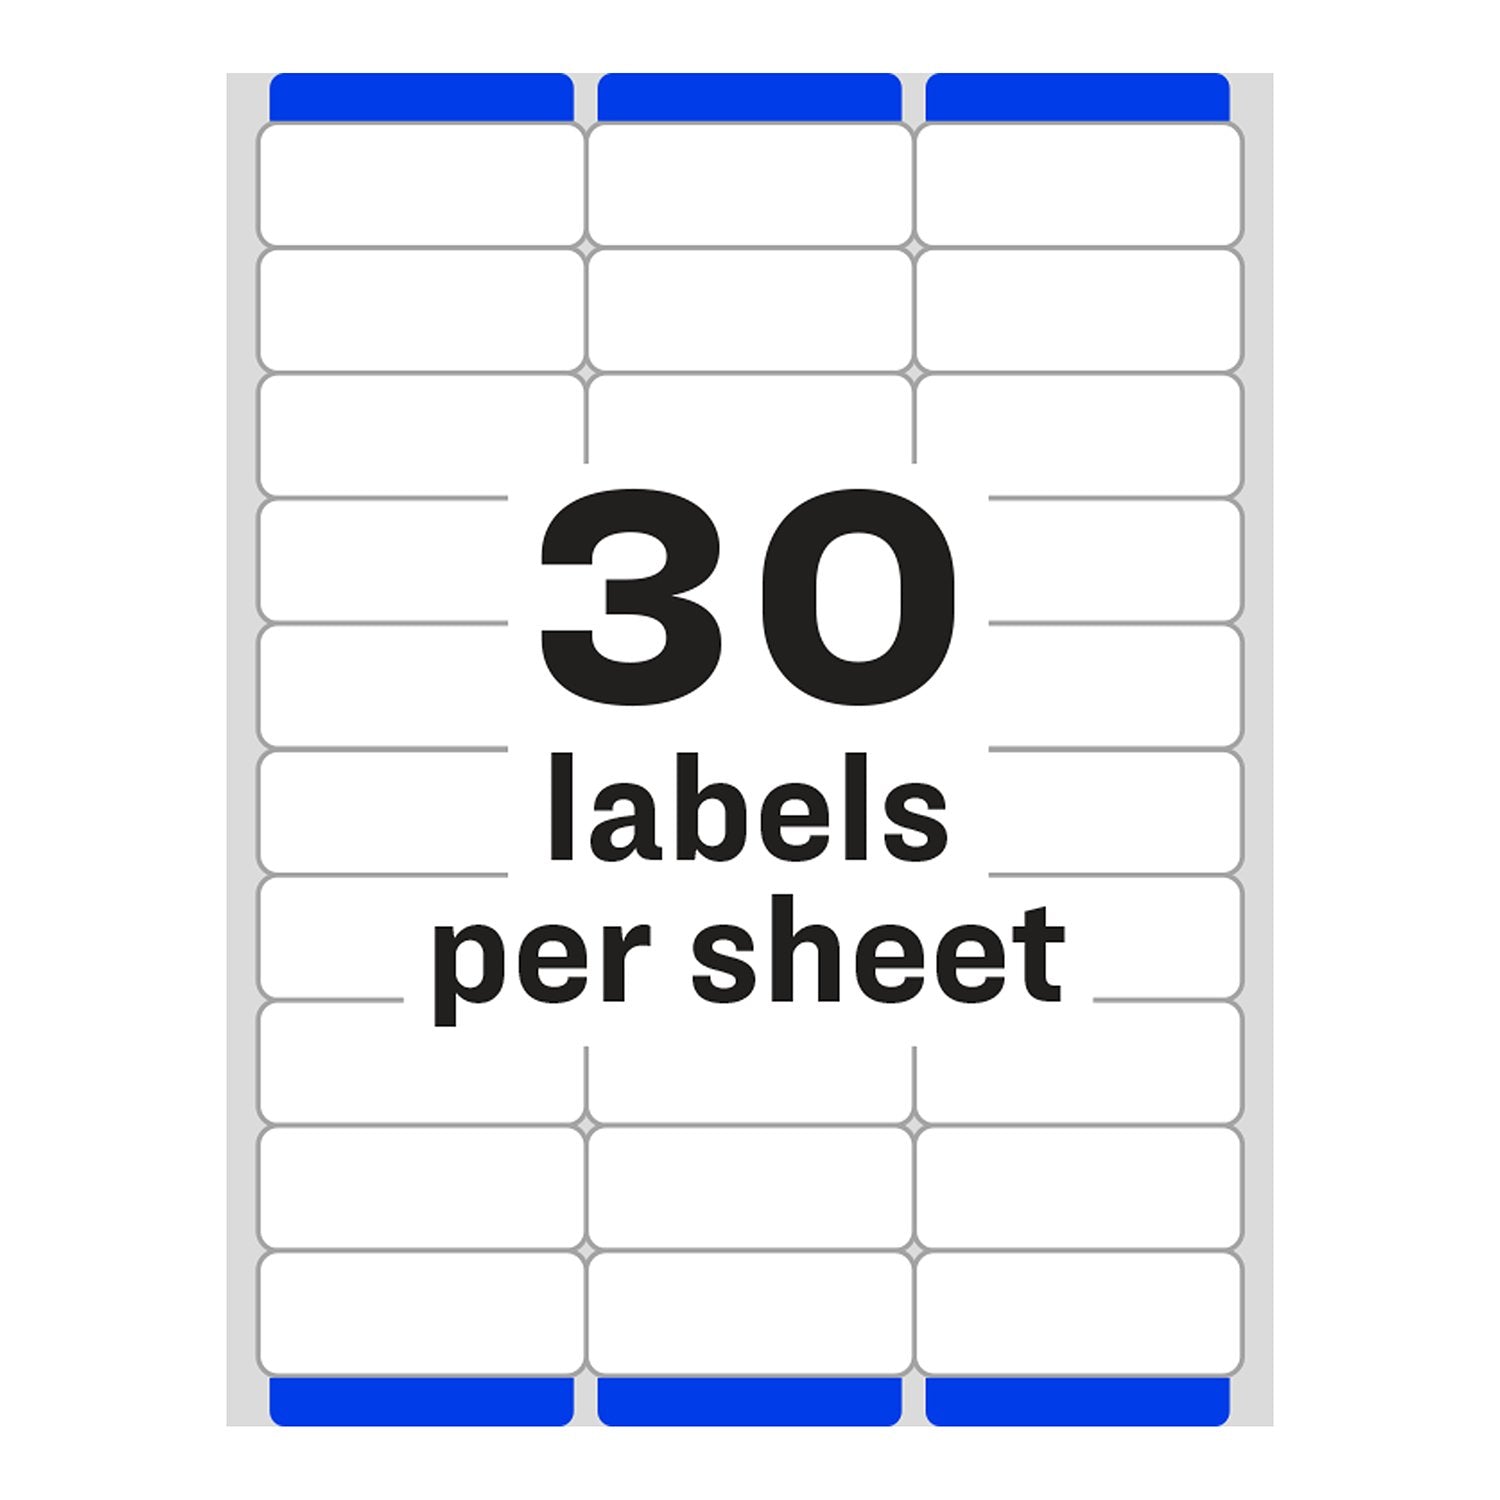 illustrator template for avery 8160 labels download